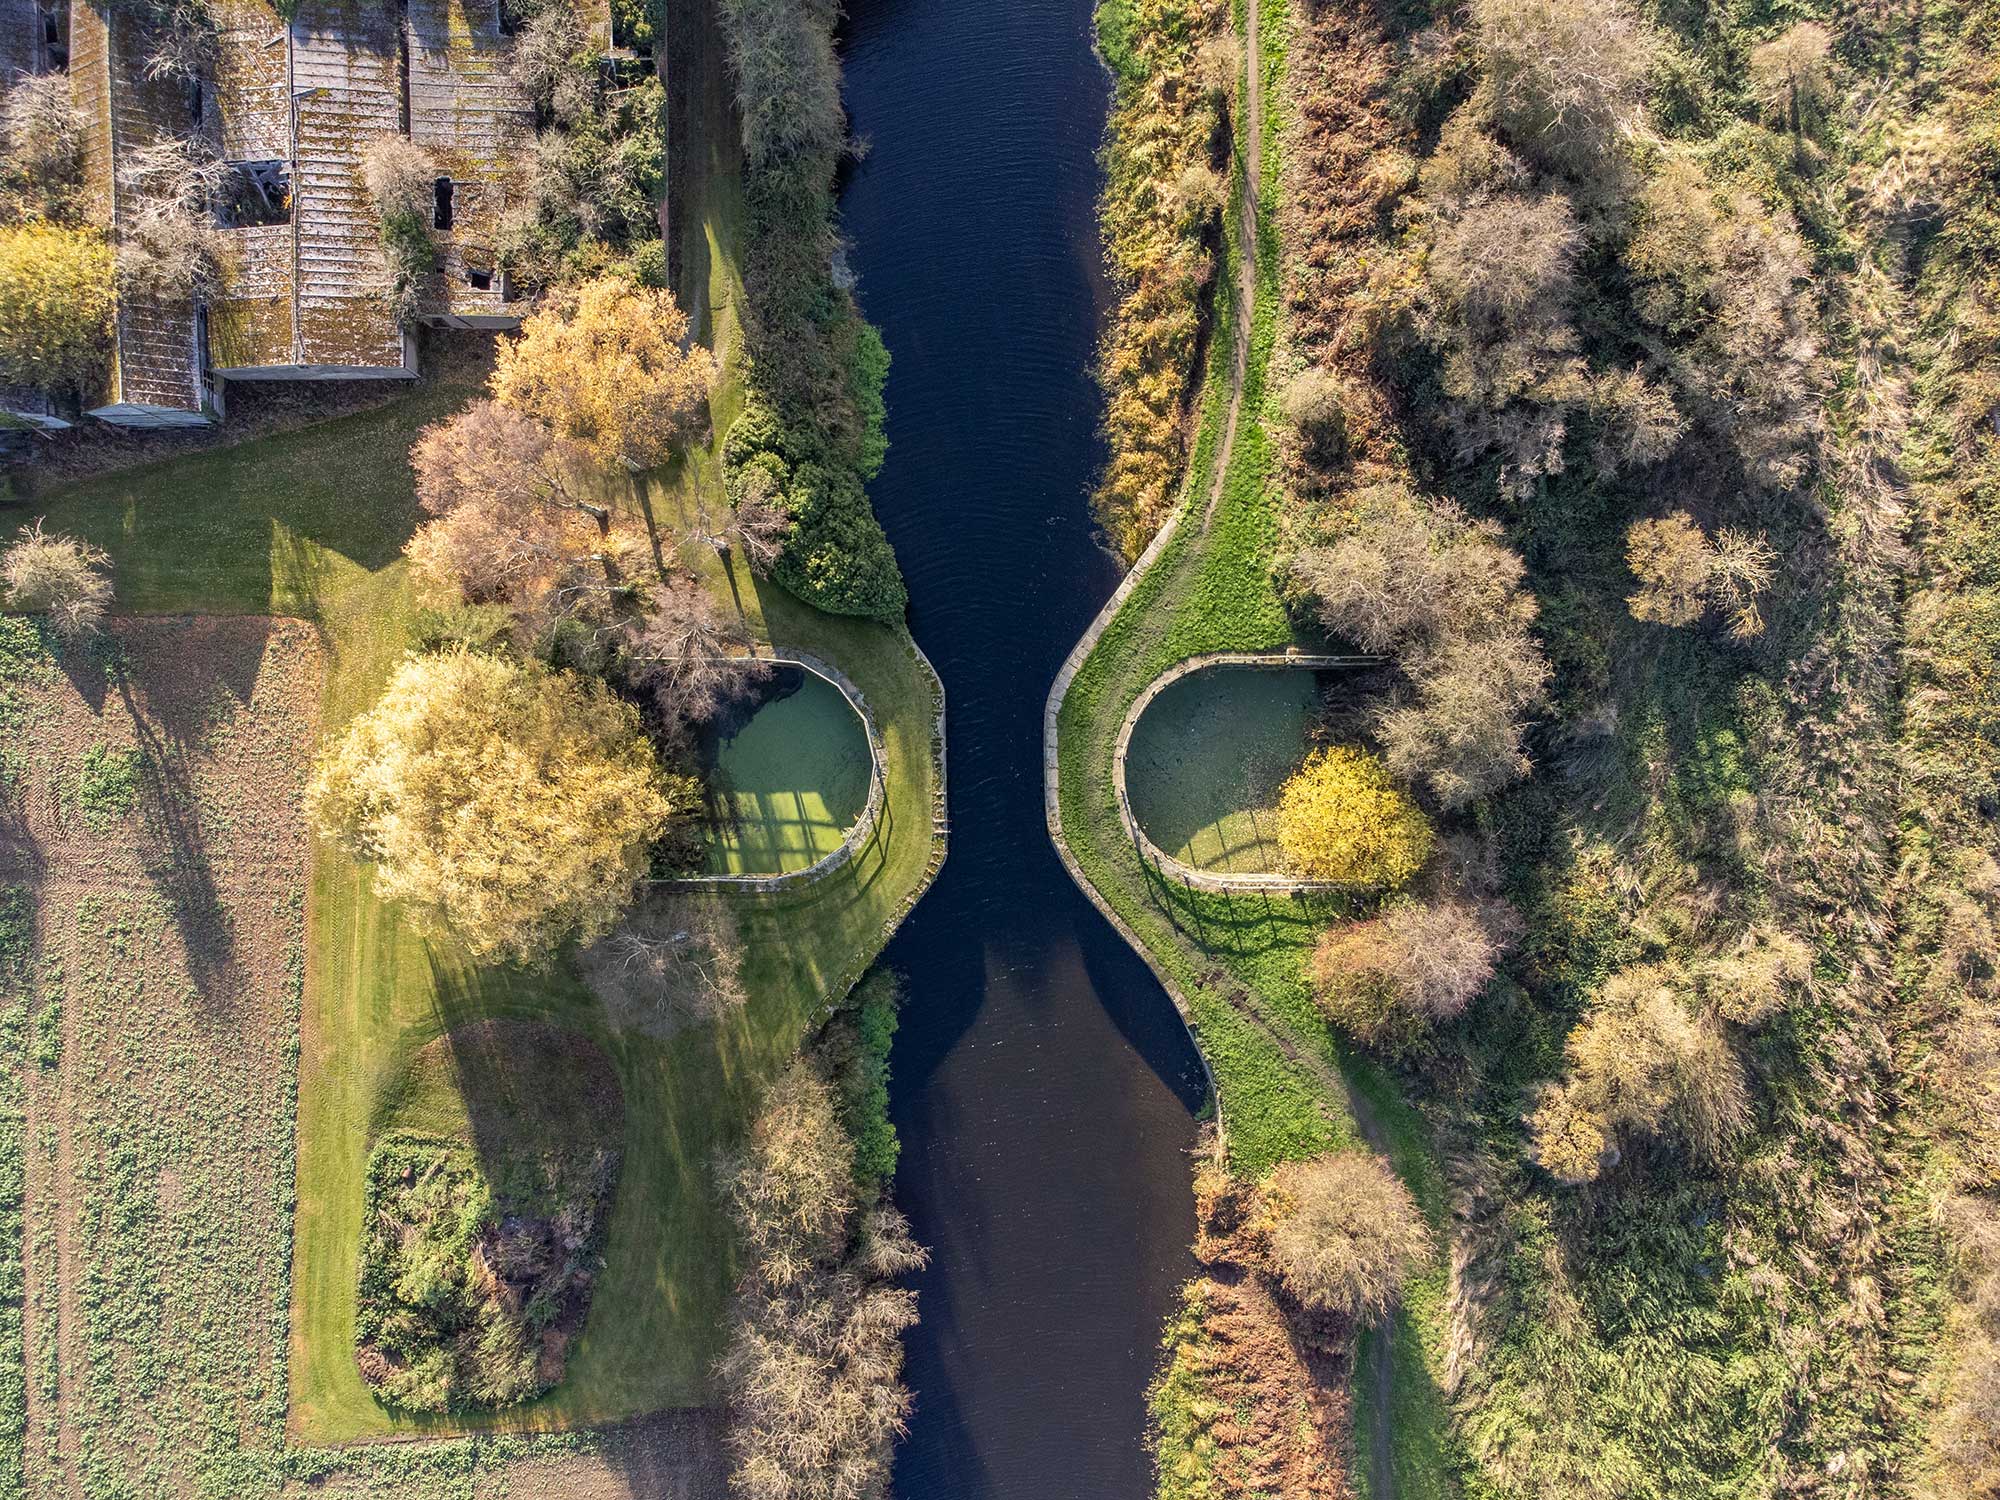 A pair of roughly D-shaped collection ponds either side of the canal channel